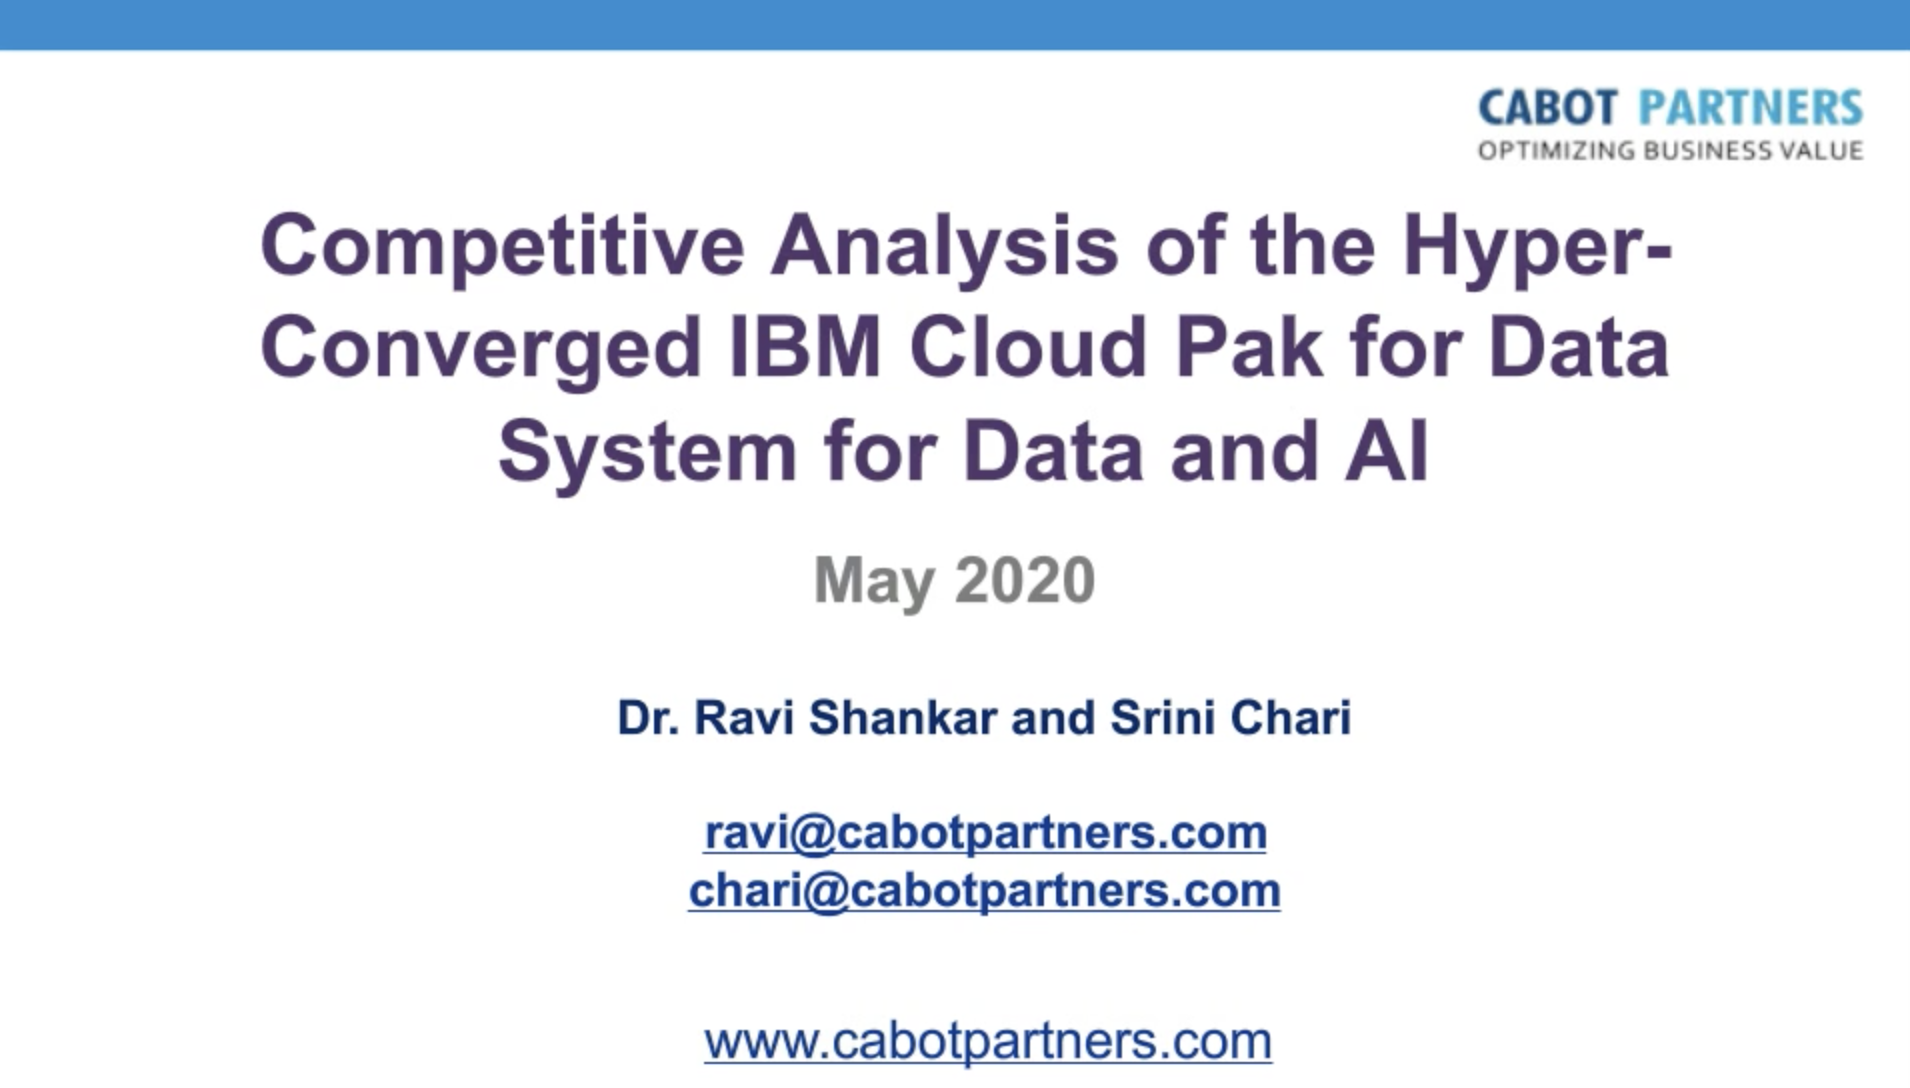 Screenshot 2020 10 20 at 15.06.42 - Cabot Webinar: Data and AI preconfigured, IBM Cloud Pak for Data System vs. the competition